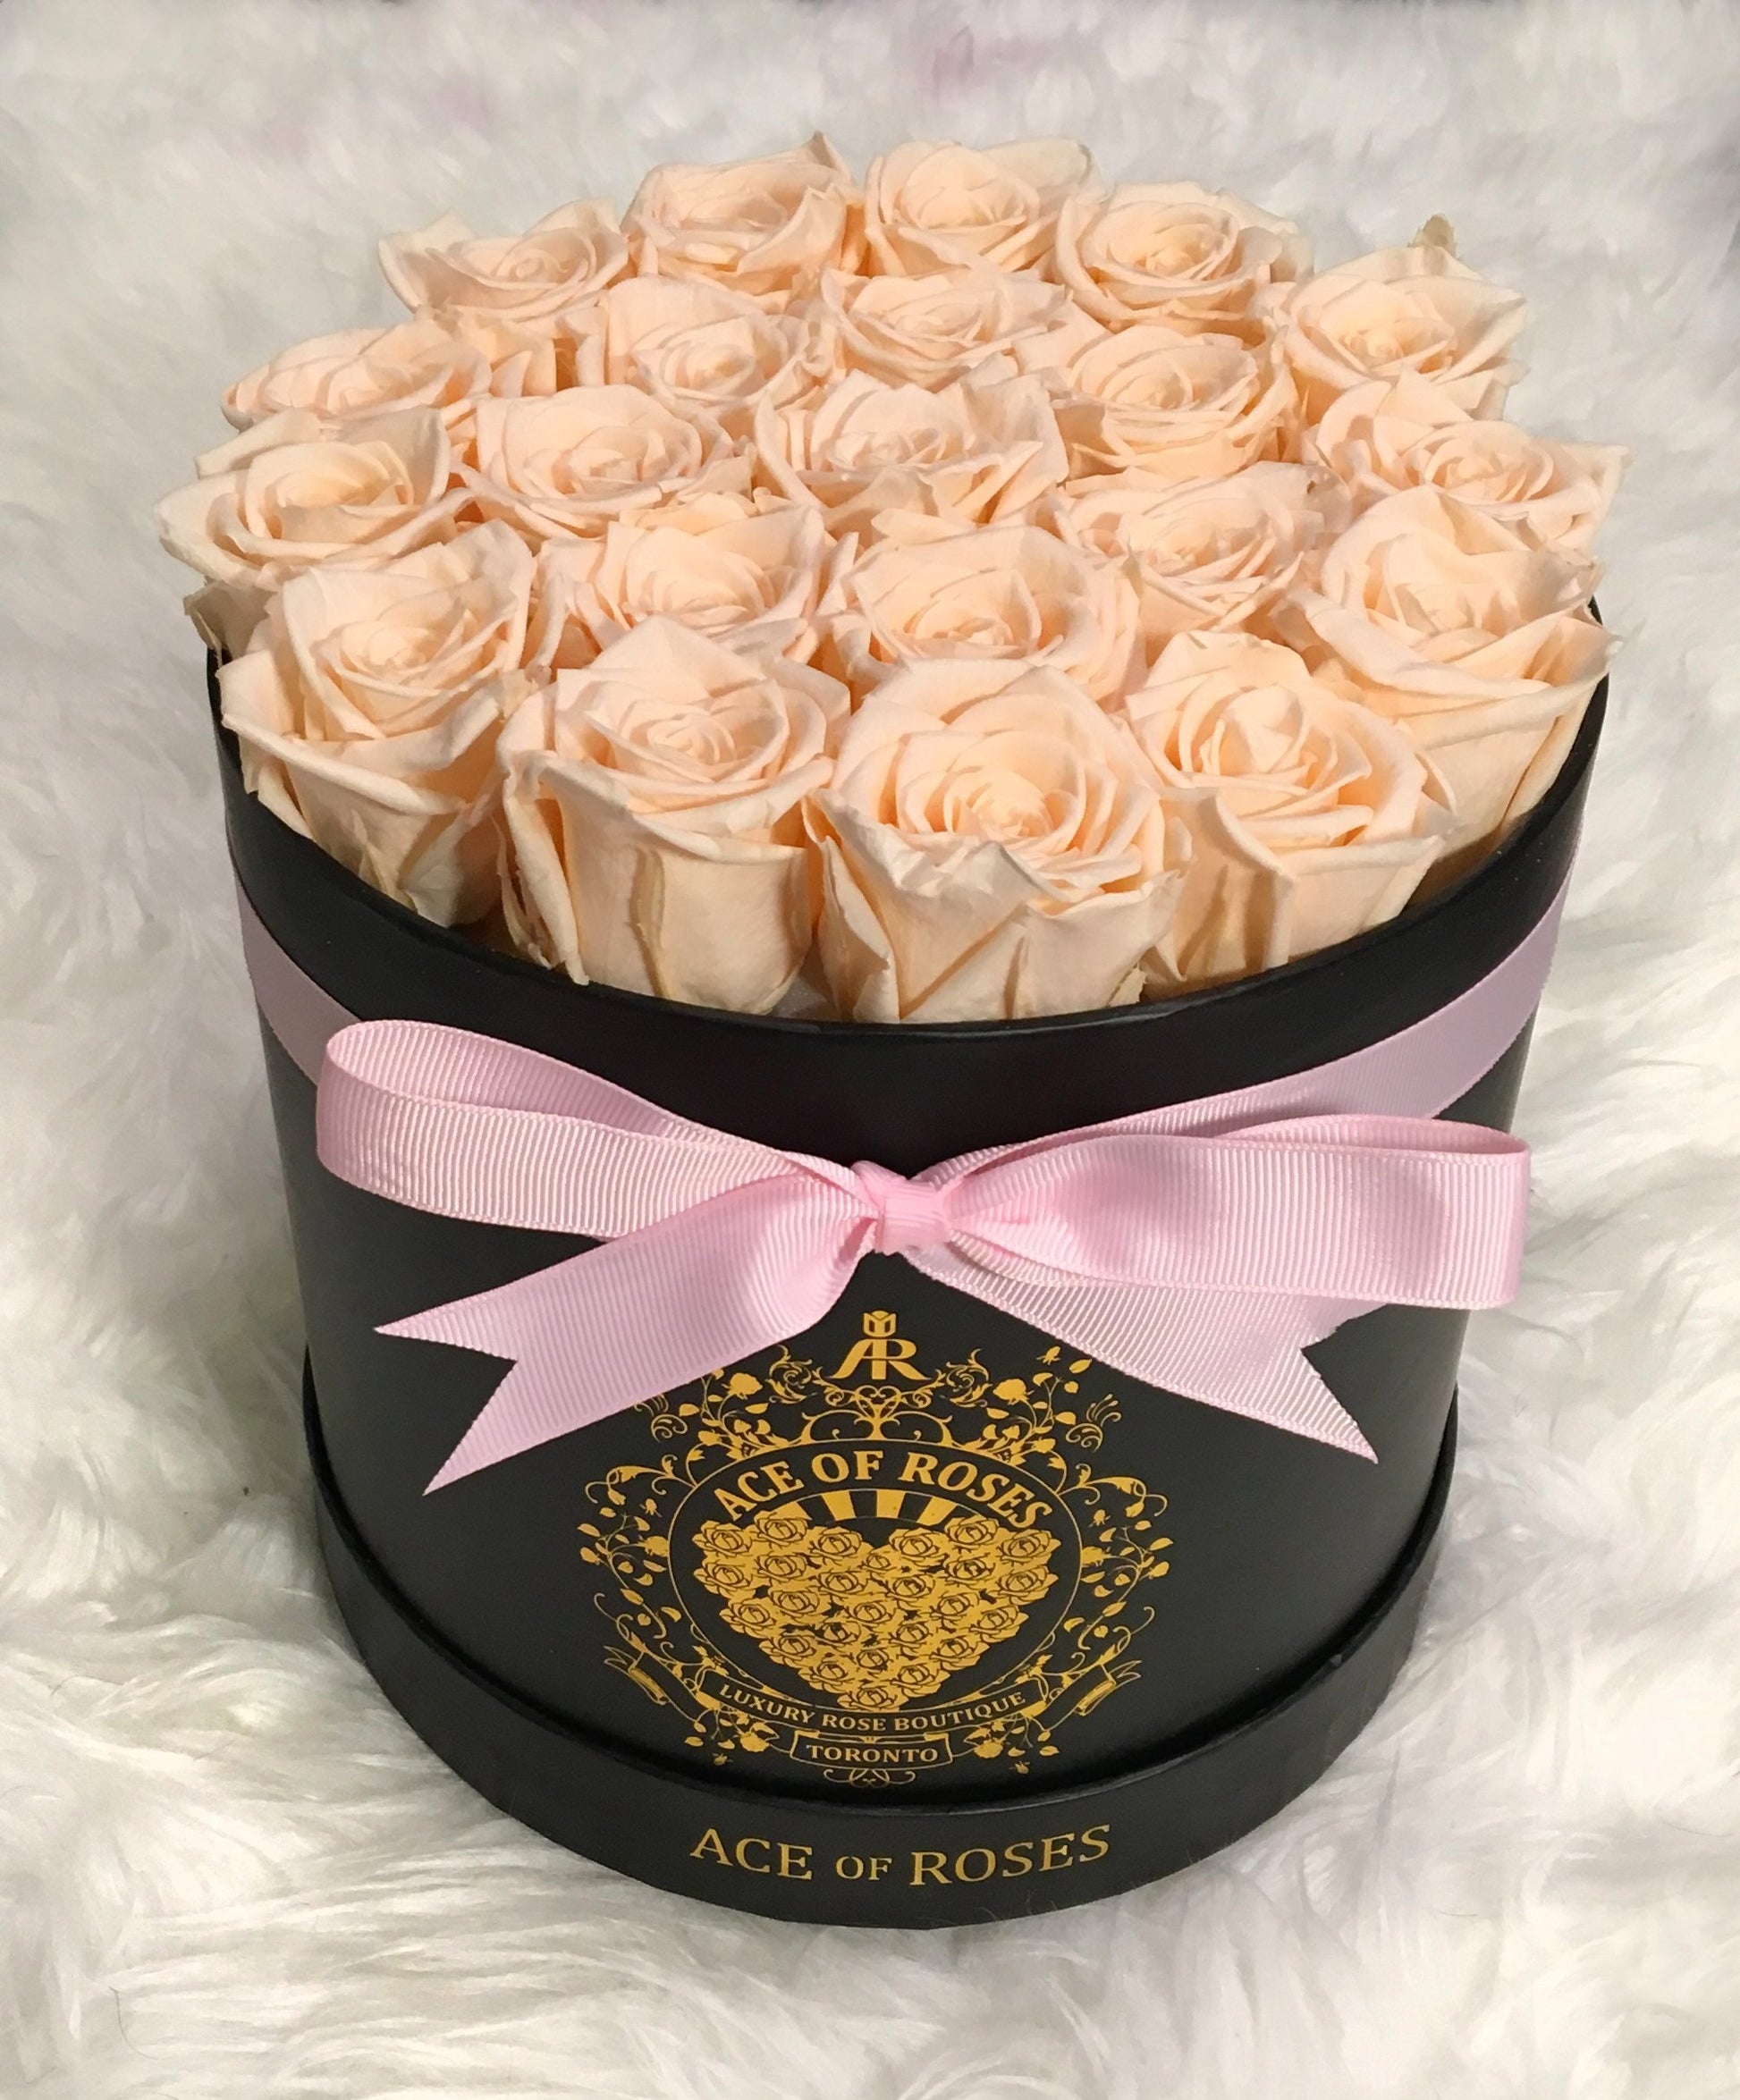 19-23 Eternity Roses. Real roses preserved naturally with a proprietary solution to keep them stunningly beautiful for a year or more. No water or direct sunlight needed. 